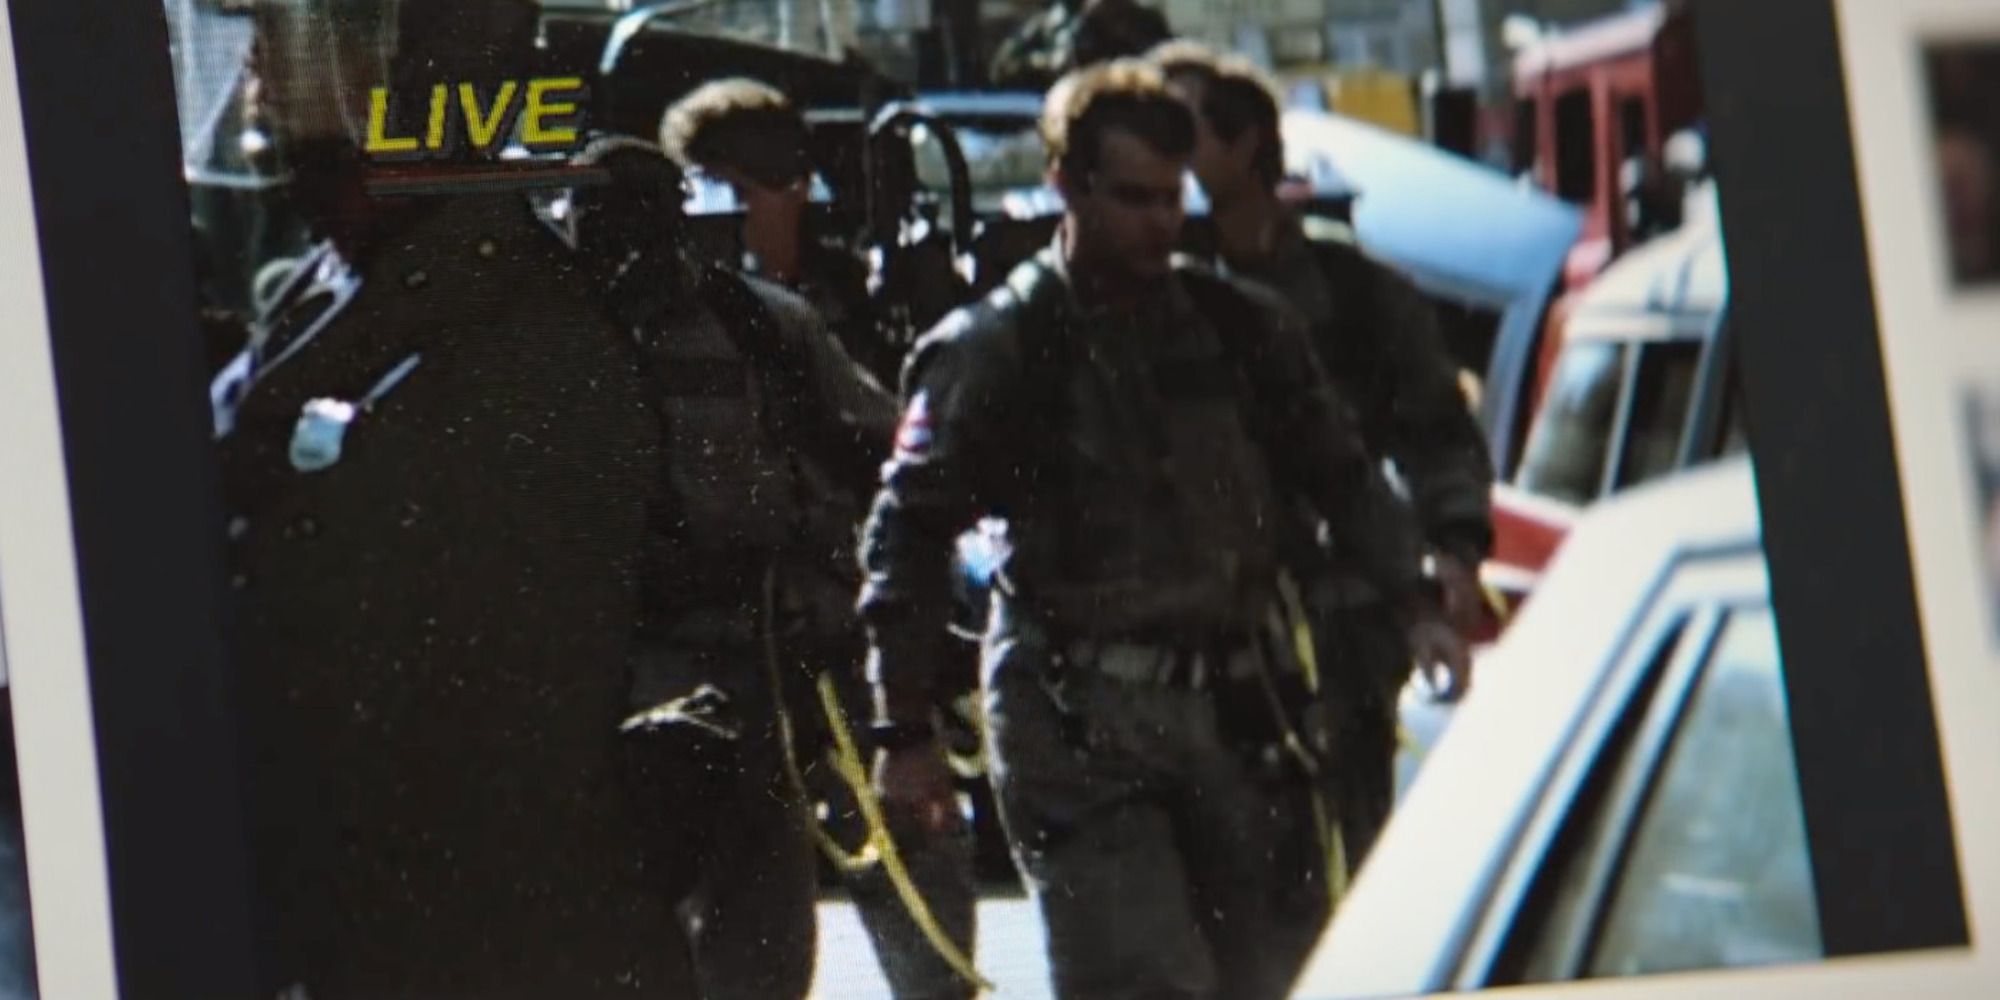 News Footage of the Ghostbusters from Ghostbusters: Afterlife